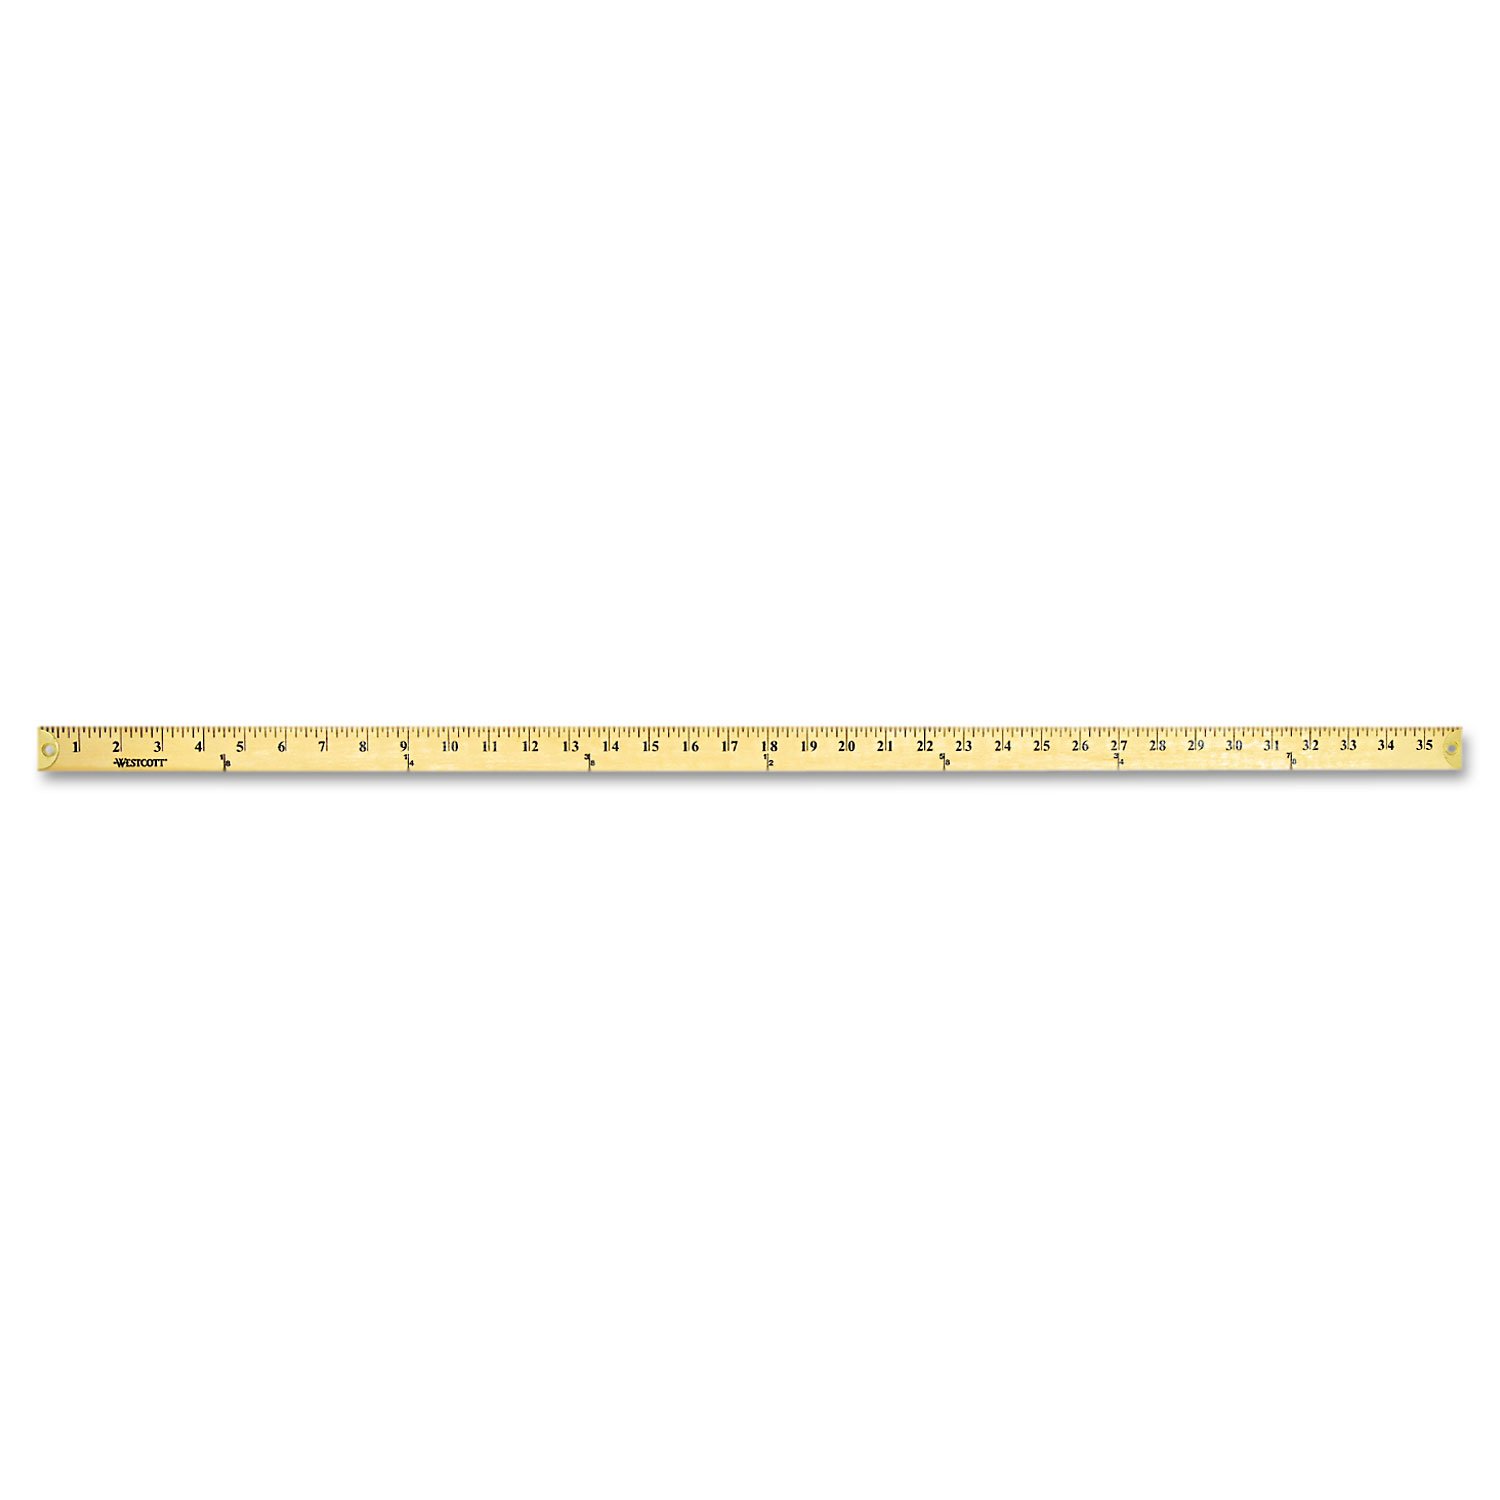 Westcott 10425 Wood Yardstick with Metal Ends, 36-Inch